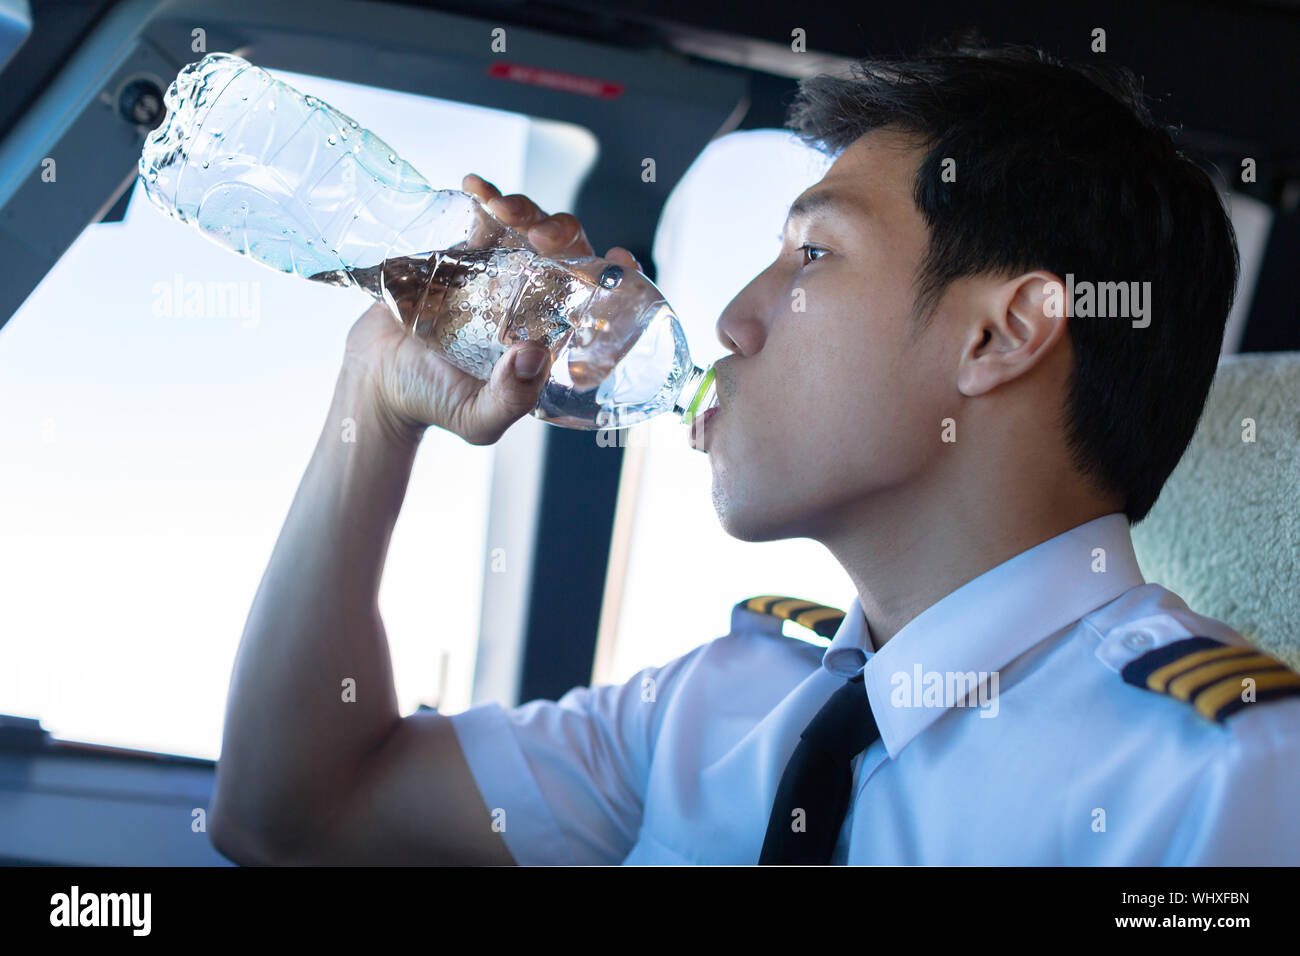 Pilot man drinking water in the airplane. Stock Photo